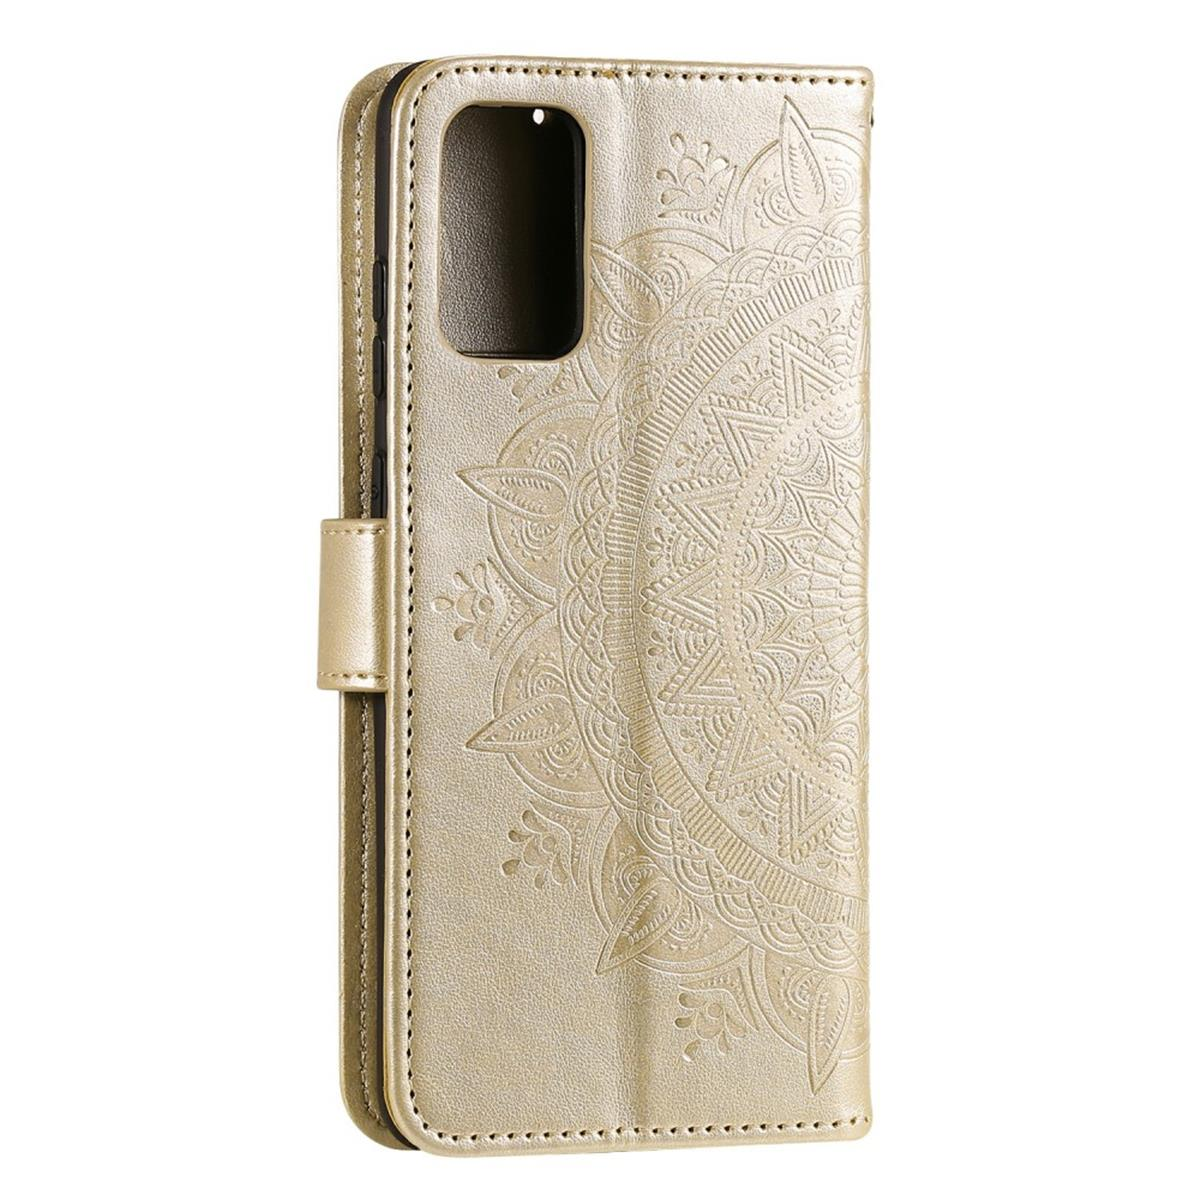 COVERKINGZ Klapphülle mit Mandala Bookcover, A72, Galaxy Samsung, Gold Muster